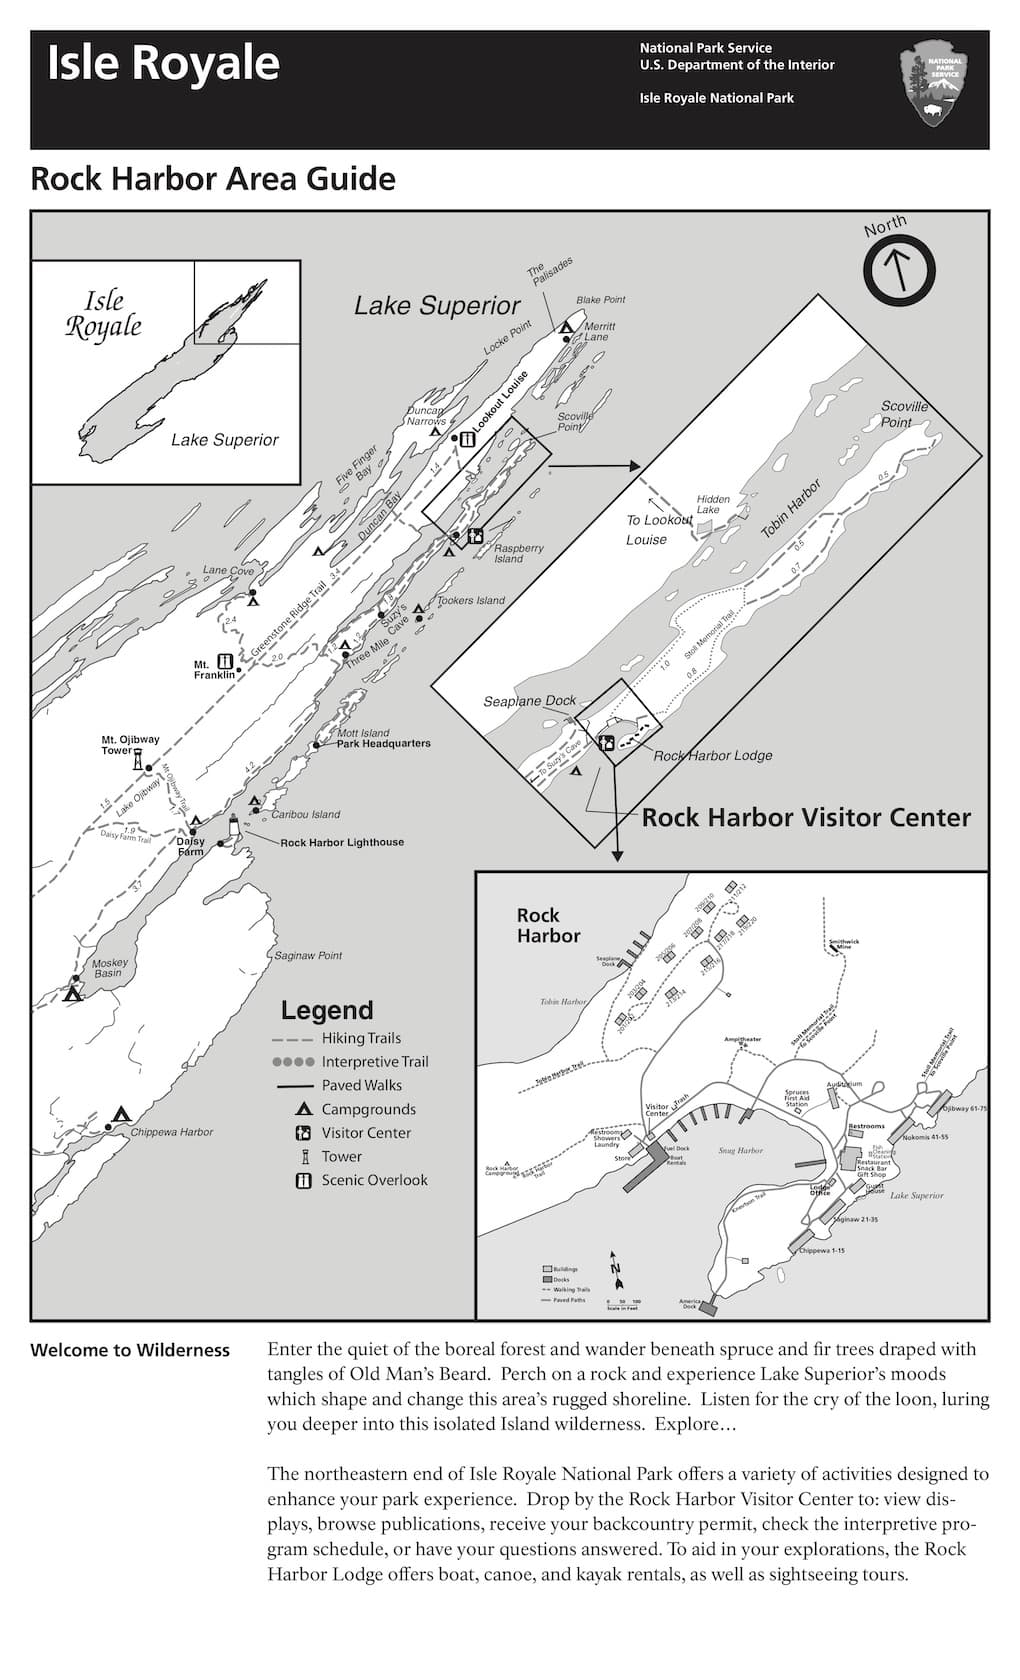 Preview image for Rock Harbor Area Guide resource